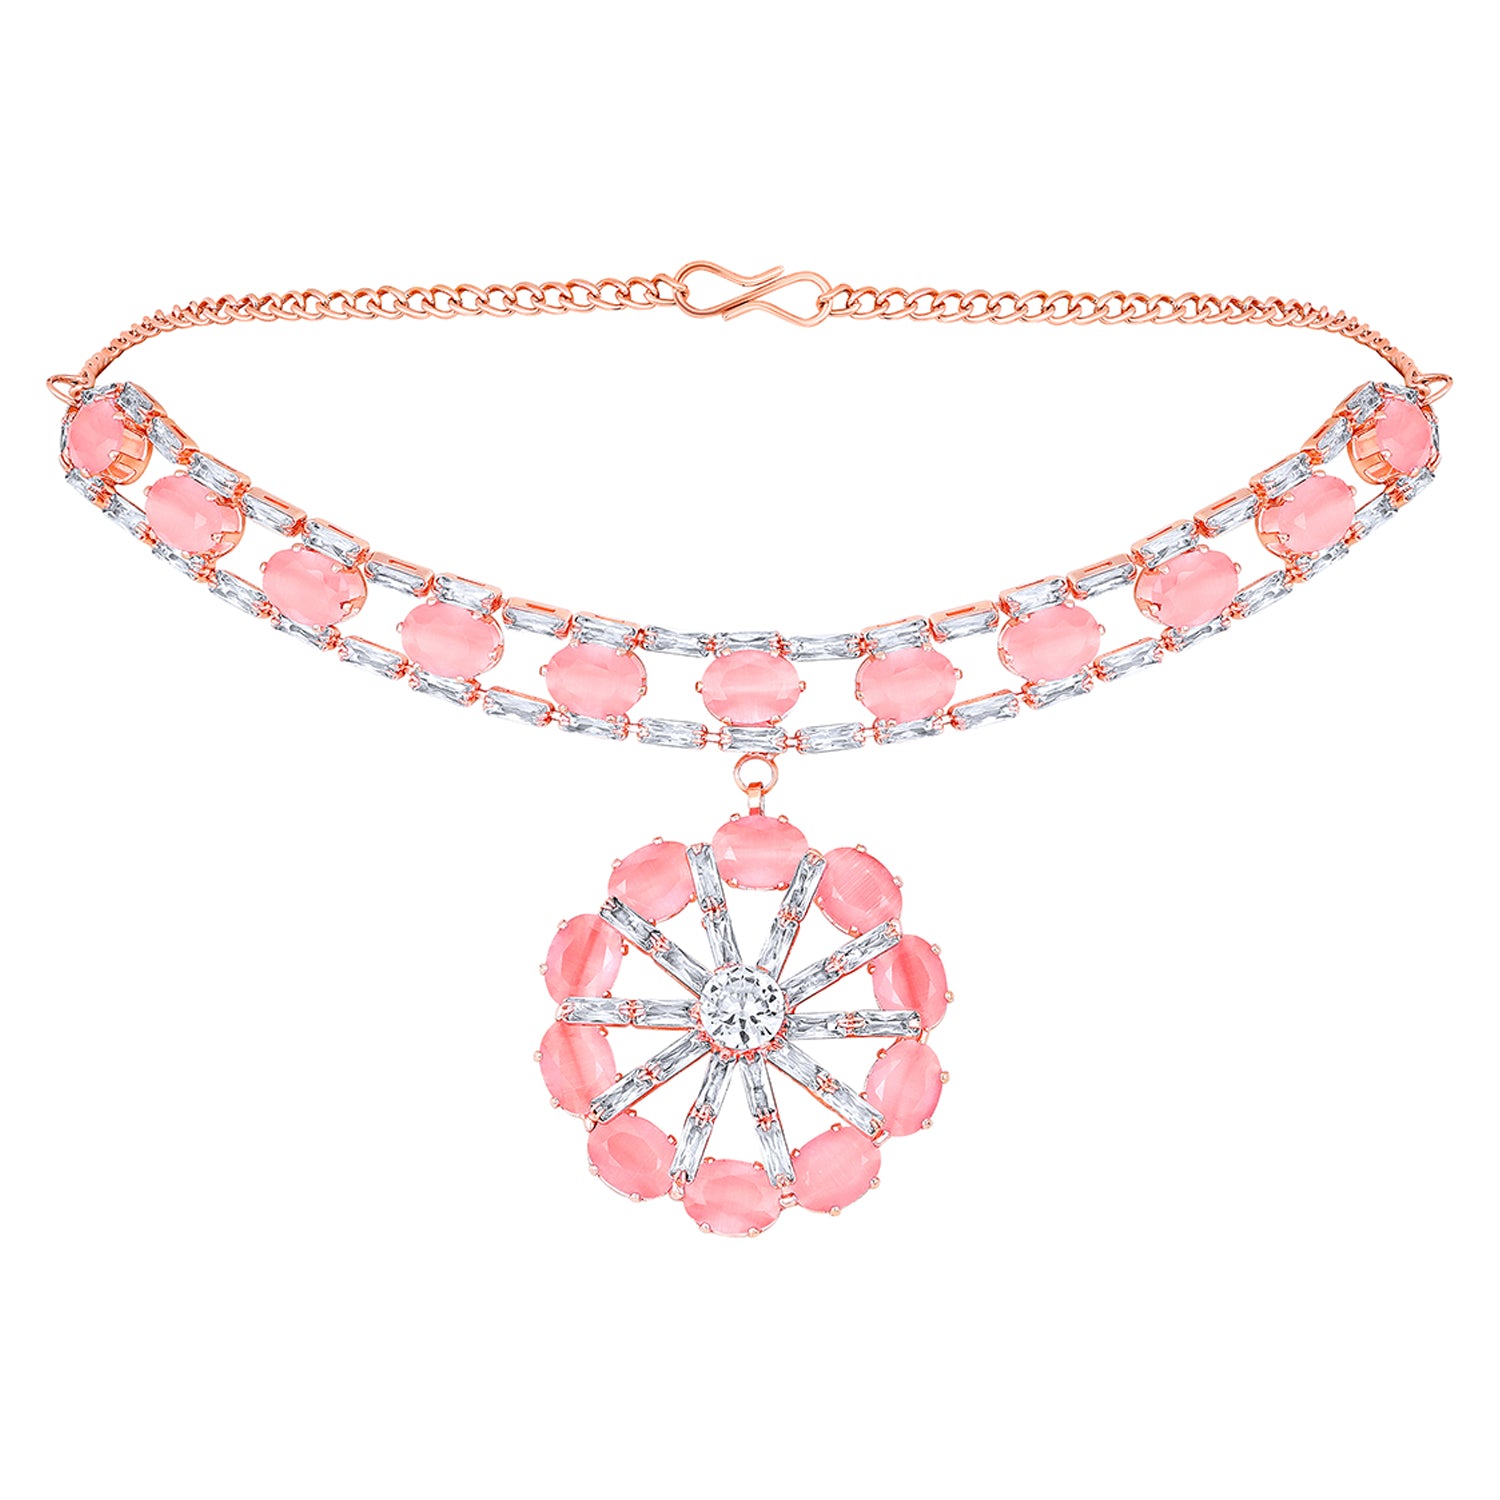 Elegant Floral CZ Necklace Paired with a Pair of Earrings